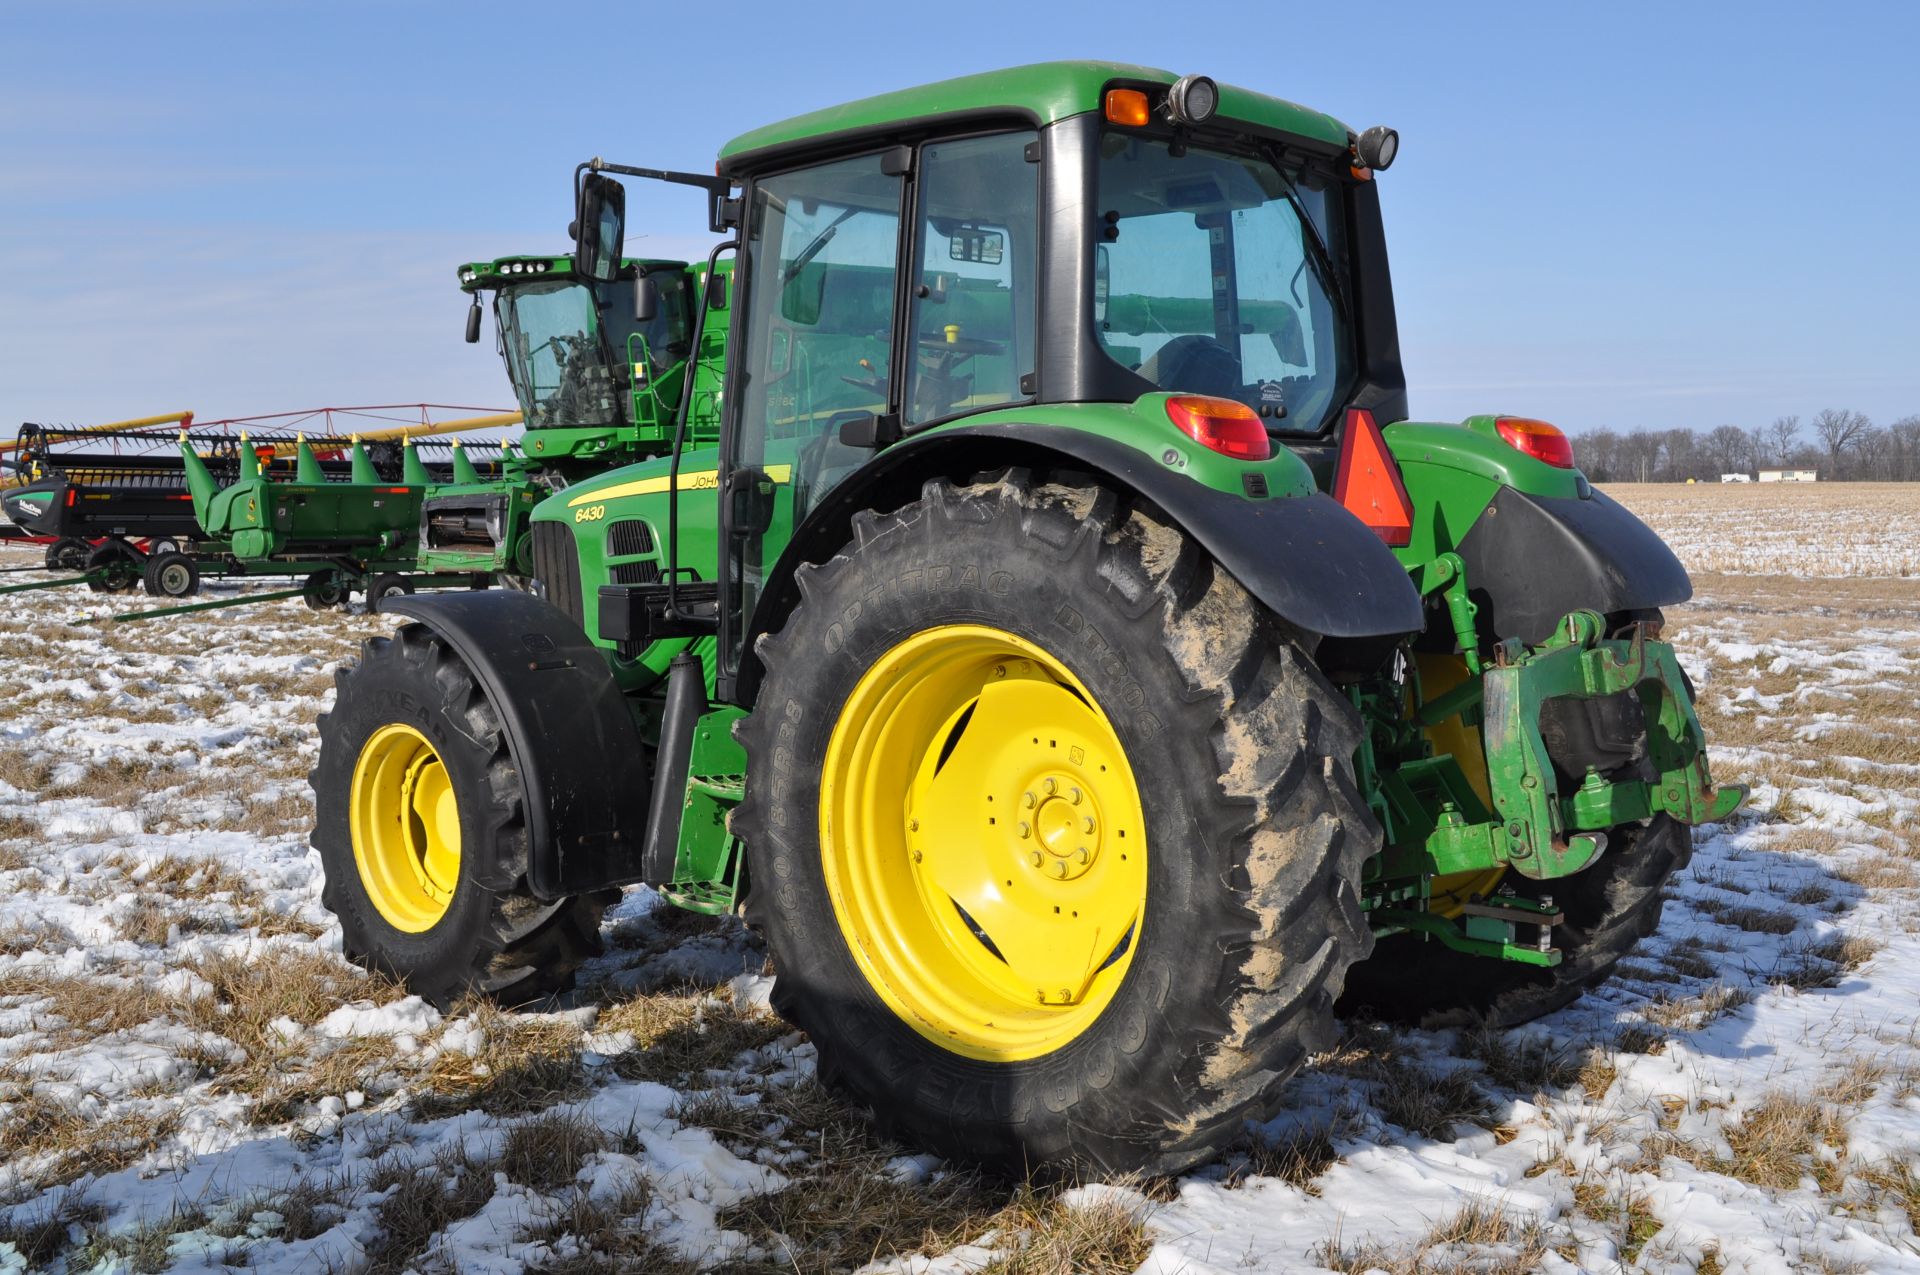 John Deere 6430 tractor, MFWD, C/H/A, 6x4 trans, 460/85R38 rear, 420/85R24 front, front fenders, - Image 2 of 36